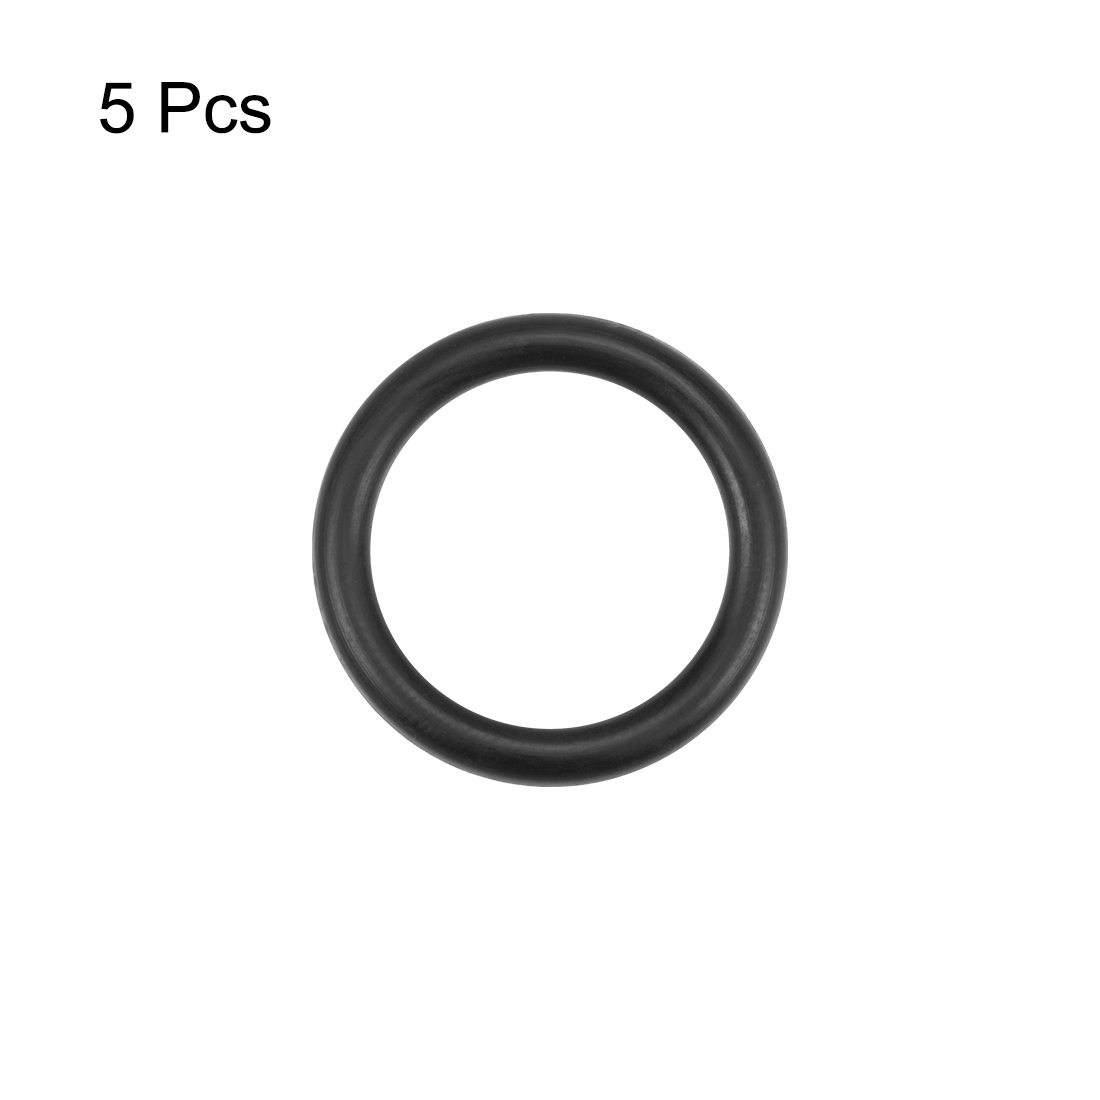 Unique Bargains O-Rings Nitrile Rubber 15mm x 20.3mm x 2.65mm Round Seal Gasket 5 Pcs